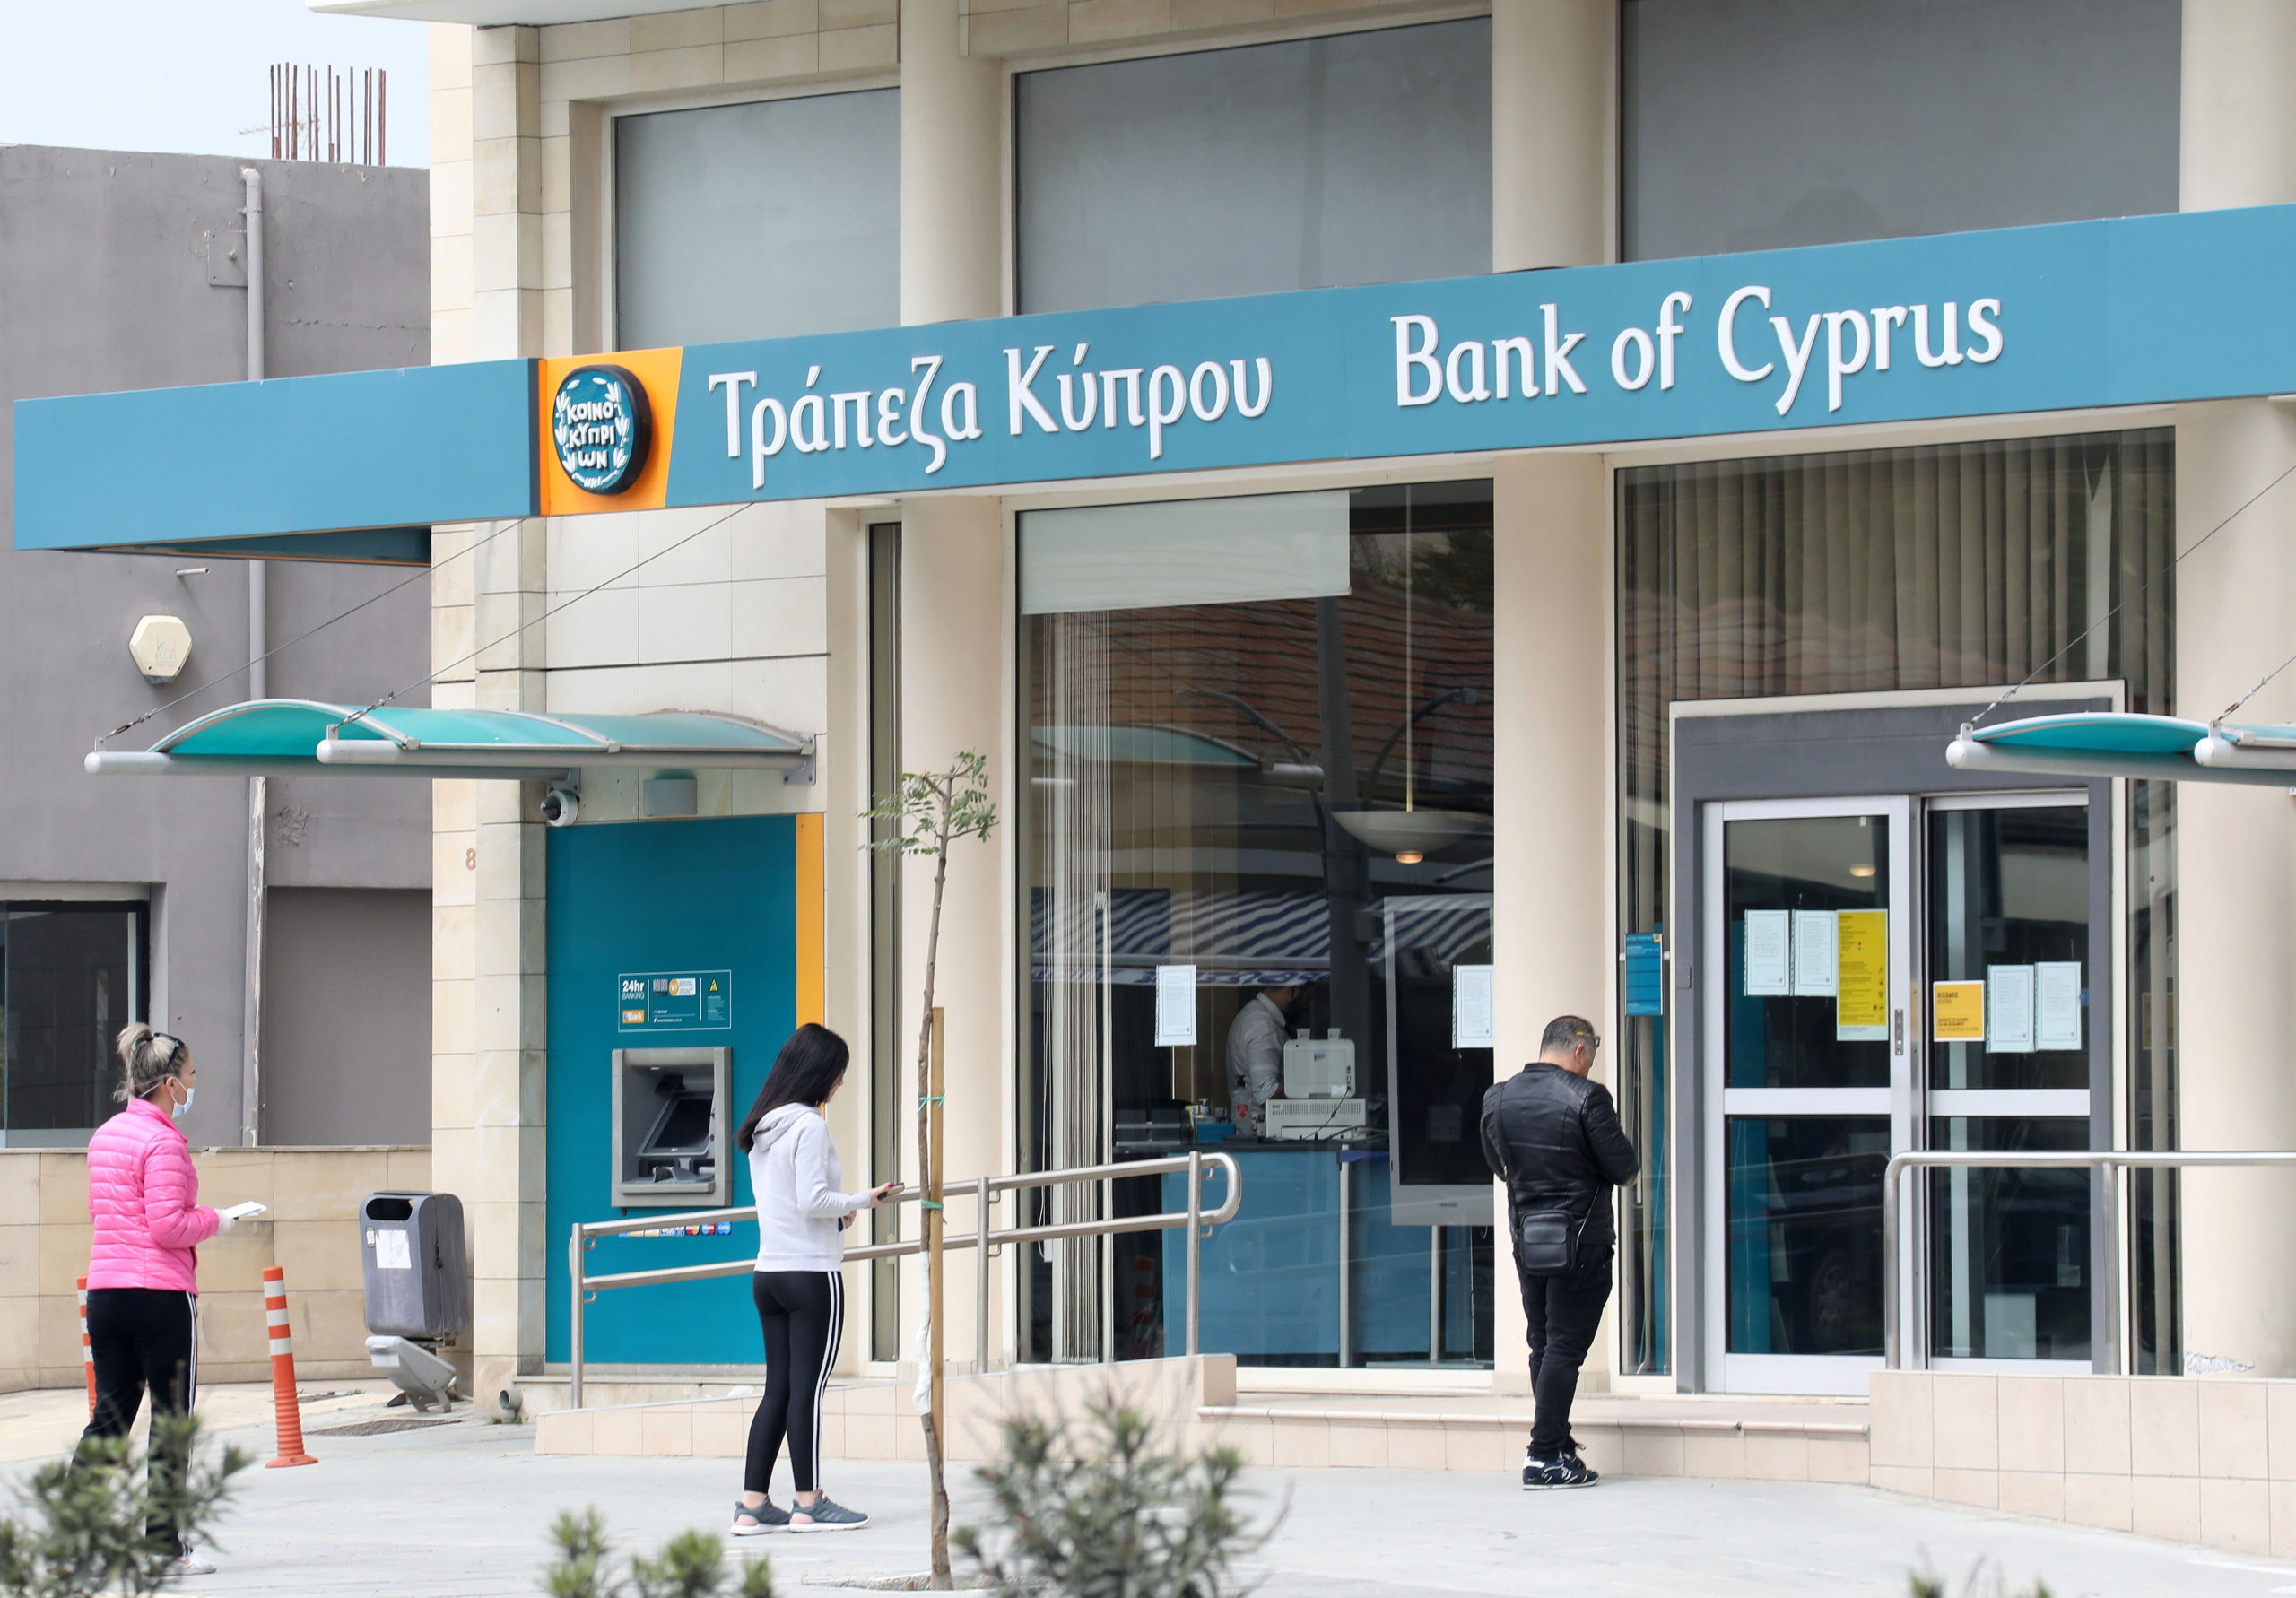 bank-of-cyprus-bogged-down-in-26-mln-loss-financial-mirror